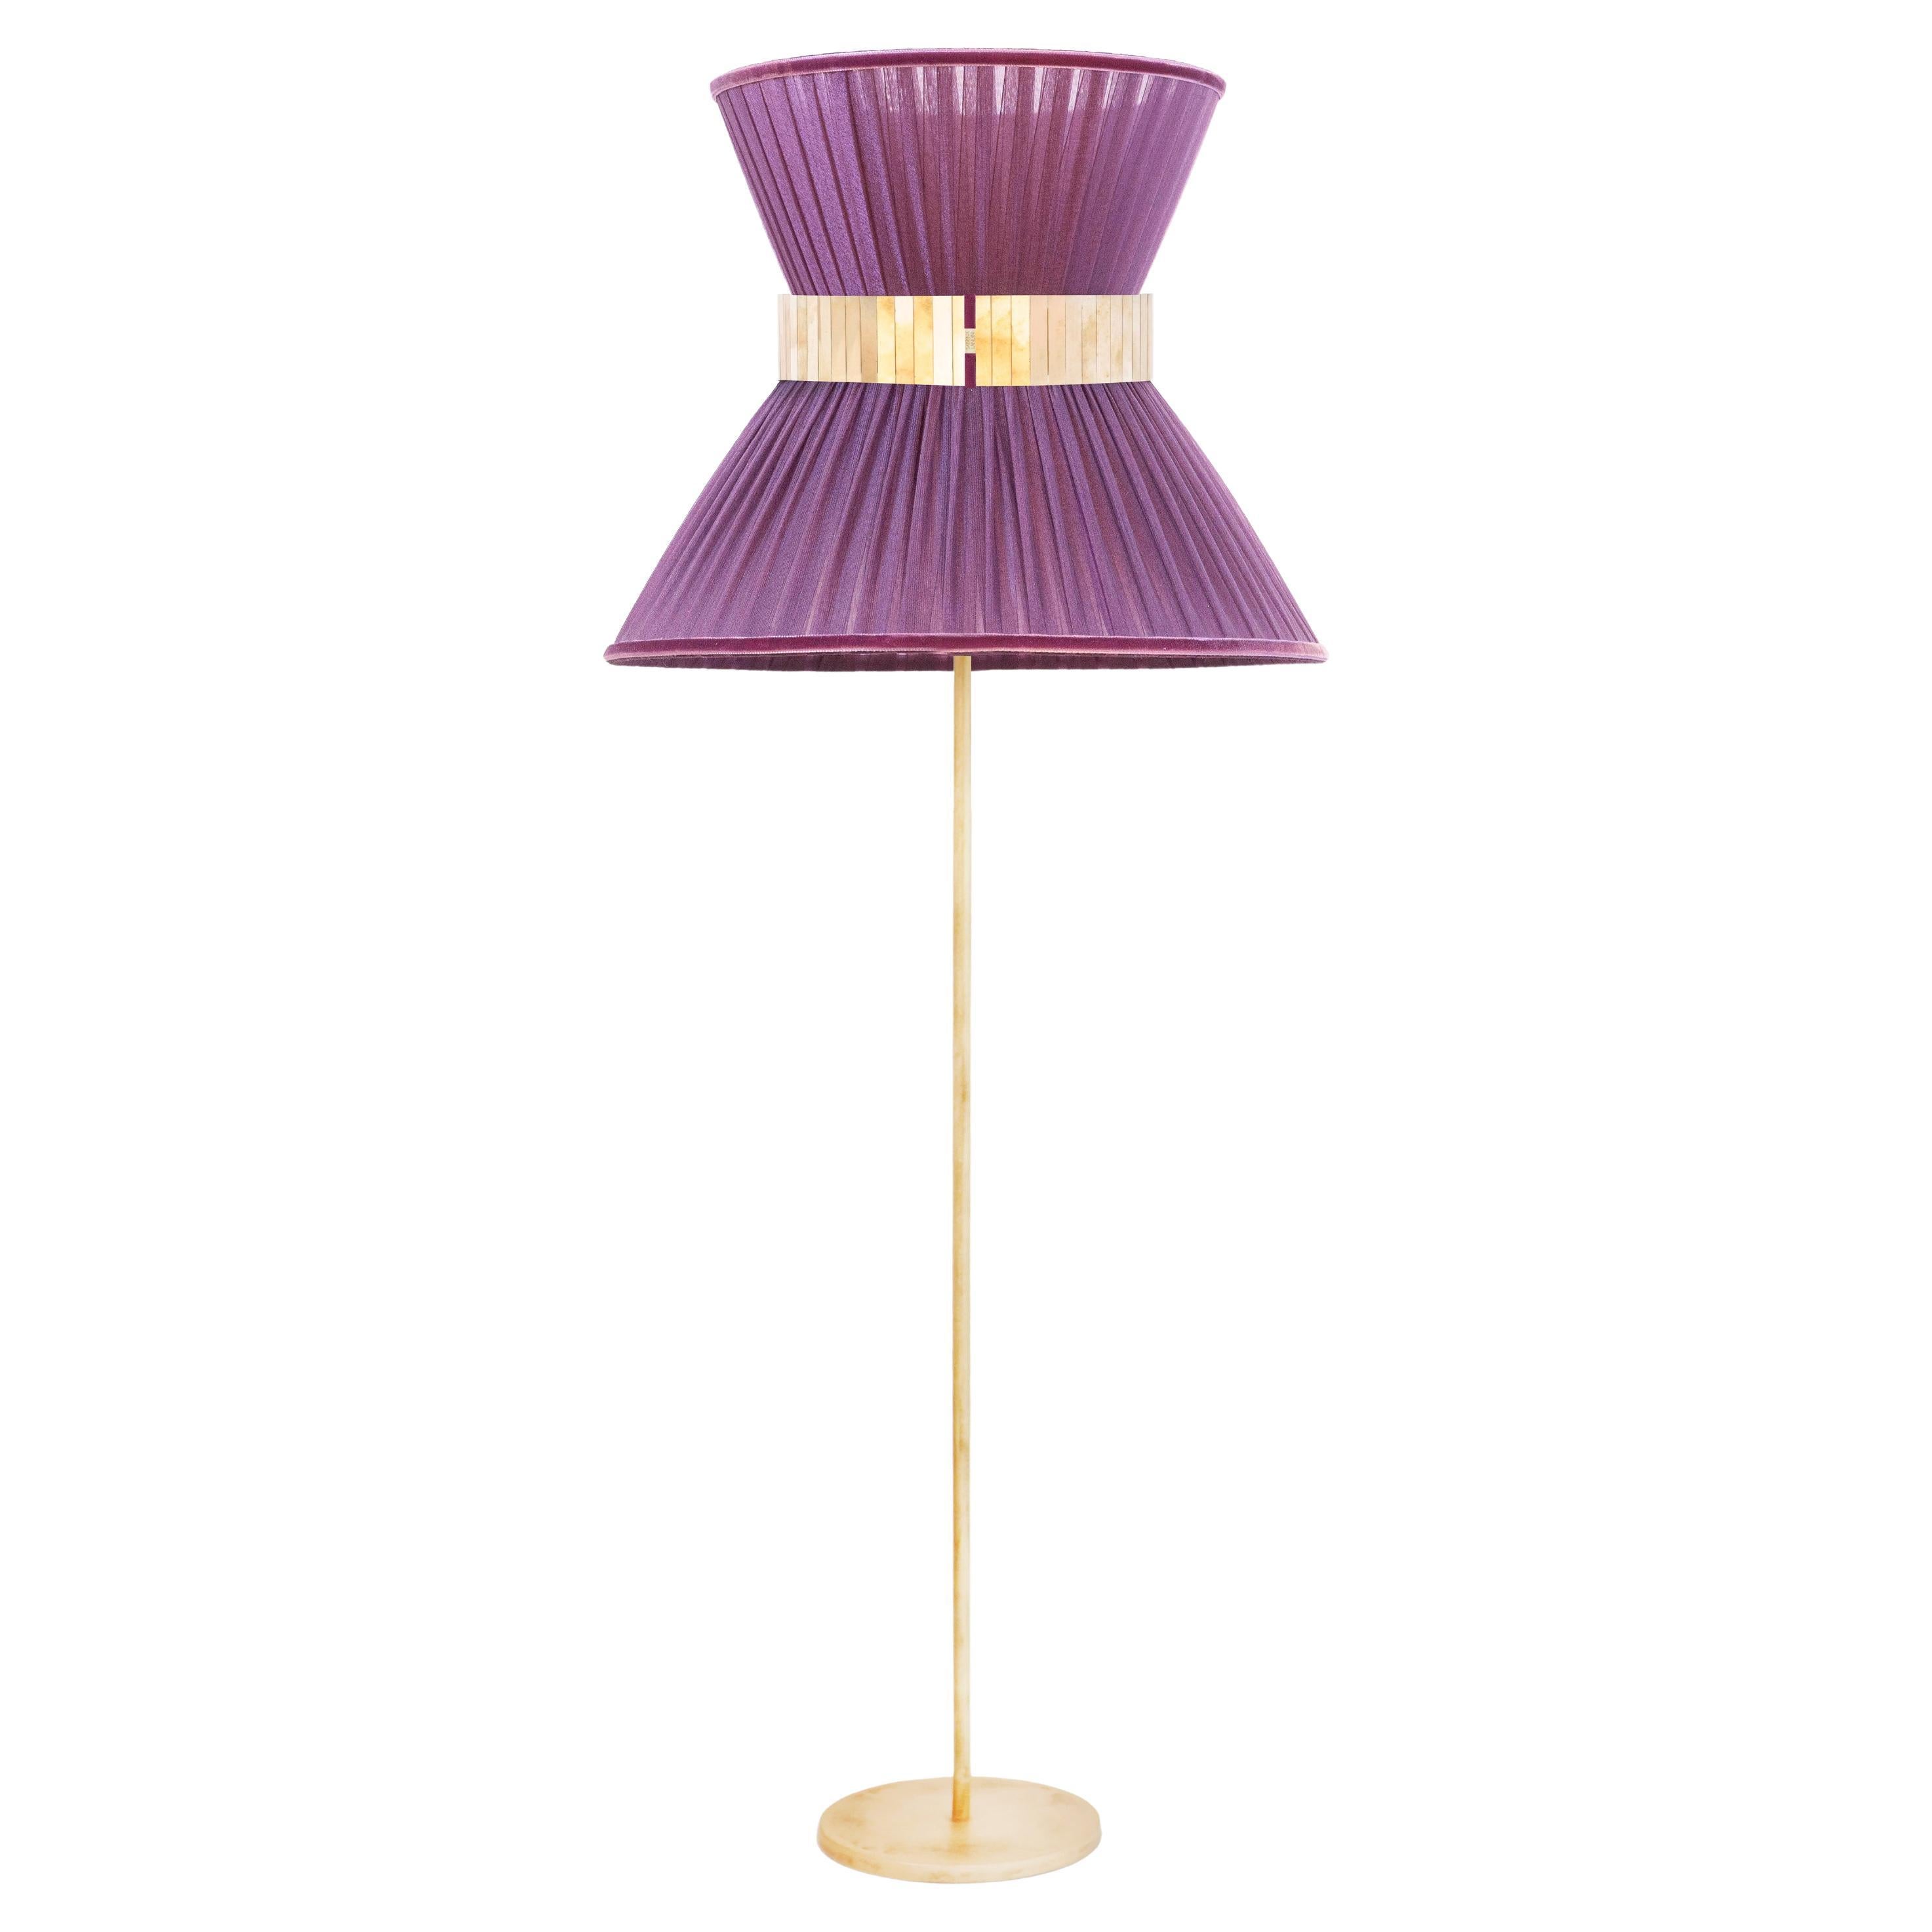 Lampadaire Tiffany Contemporary 80 Purple Silk, Antiqued Brass, Silvered Glass